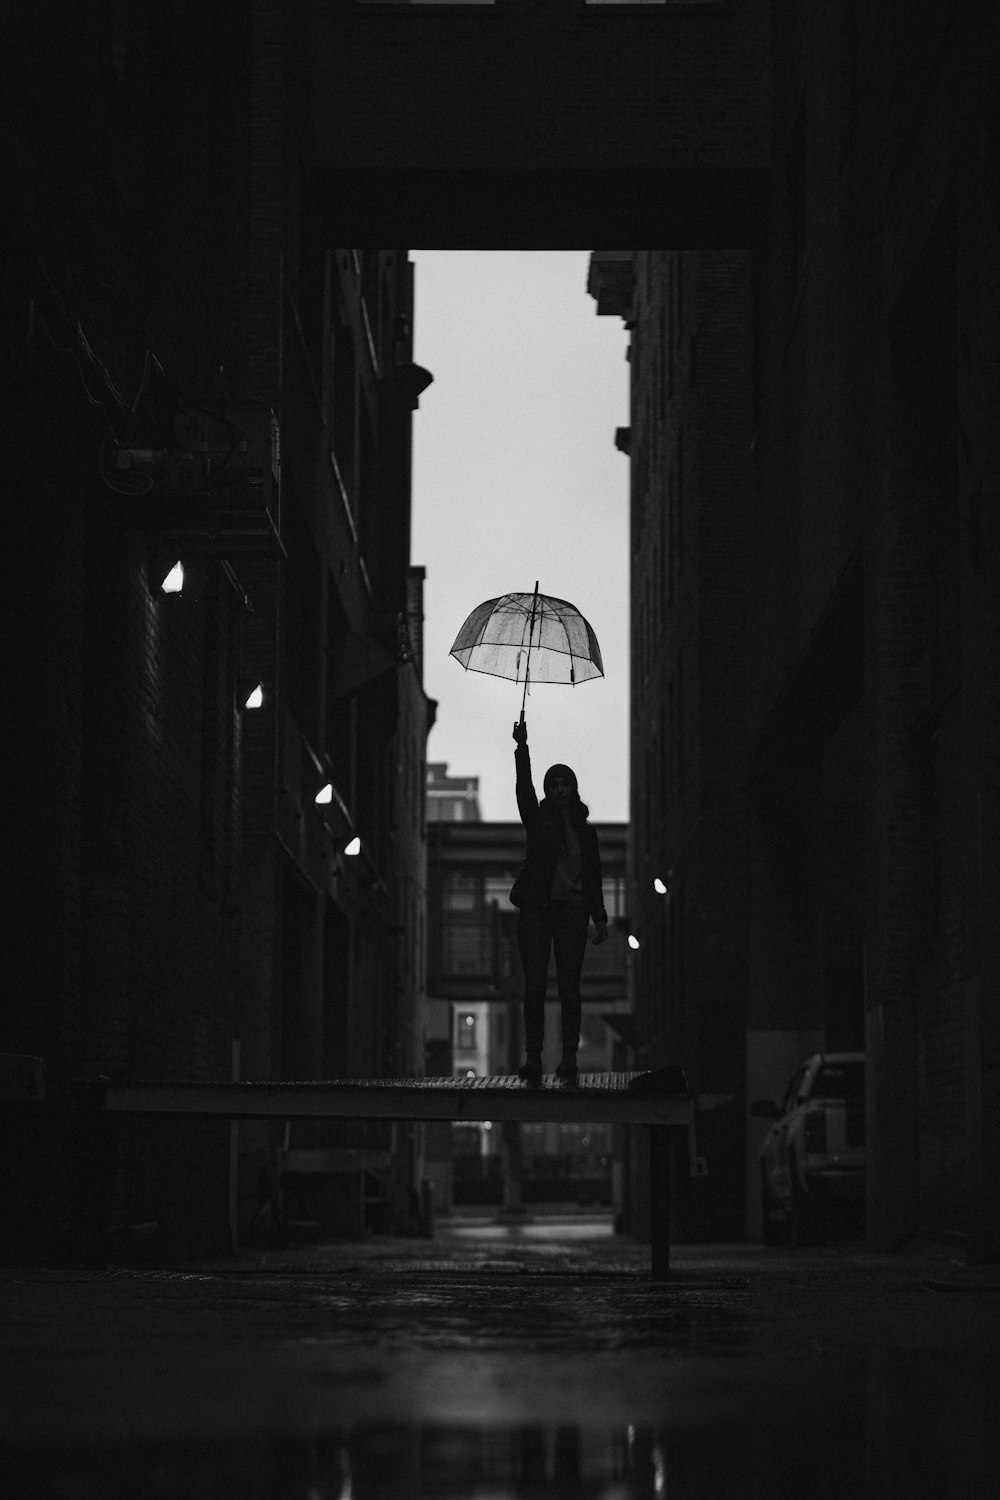 a person holding an umbrella in a dark alleyway